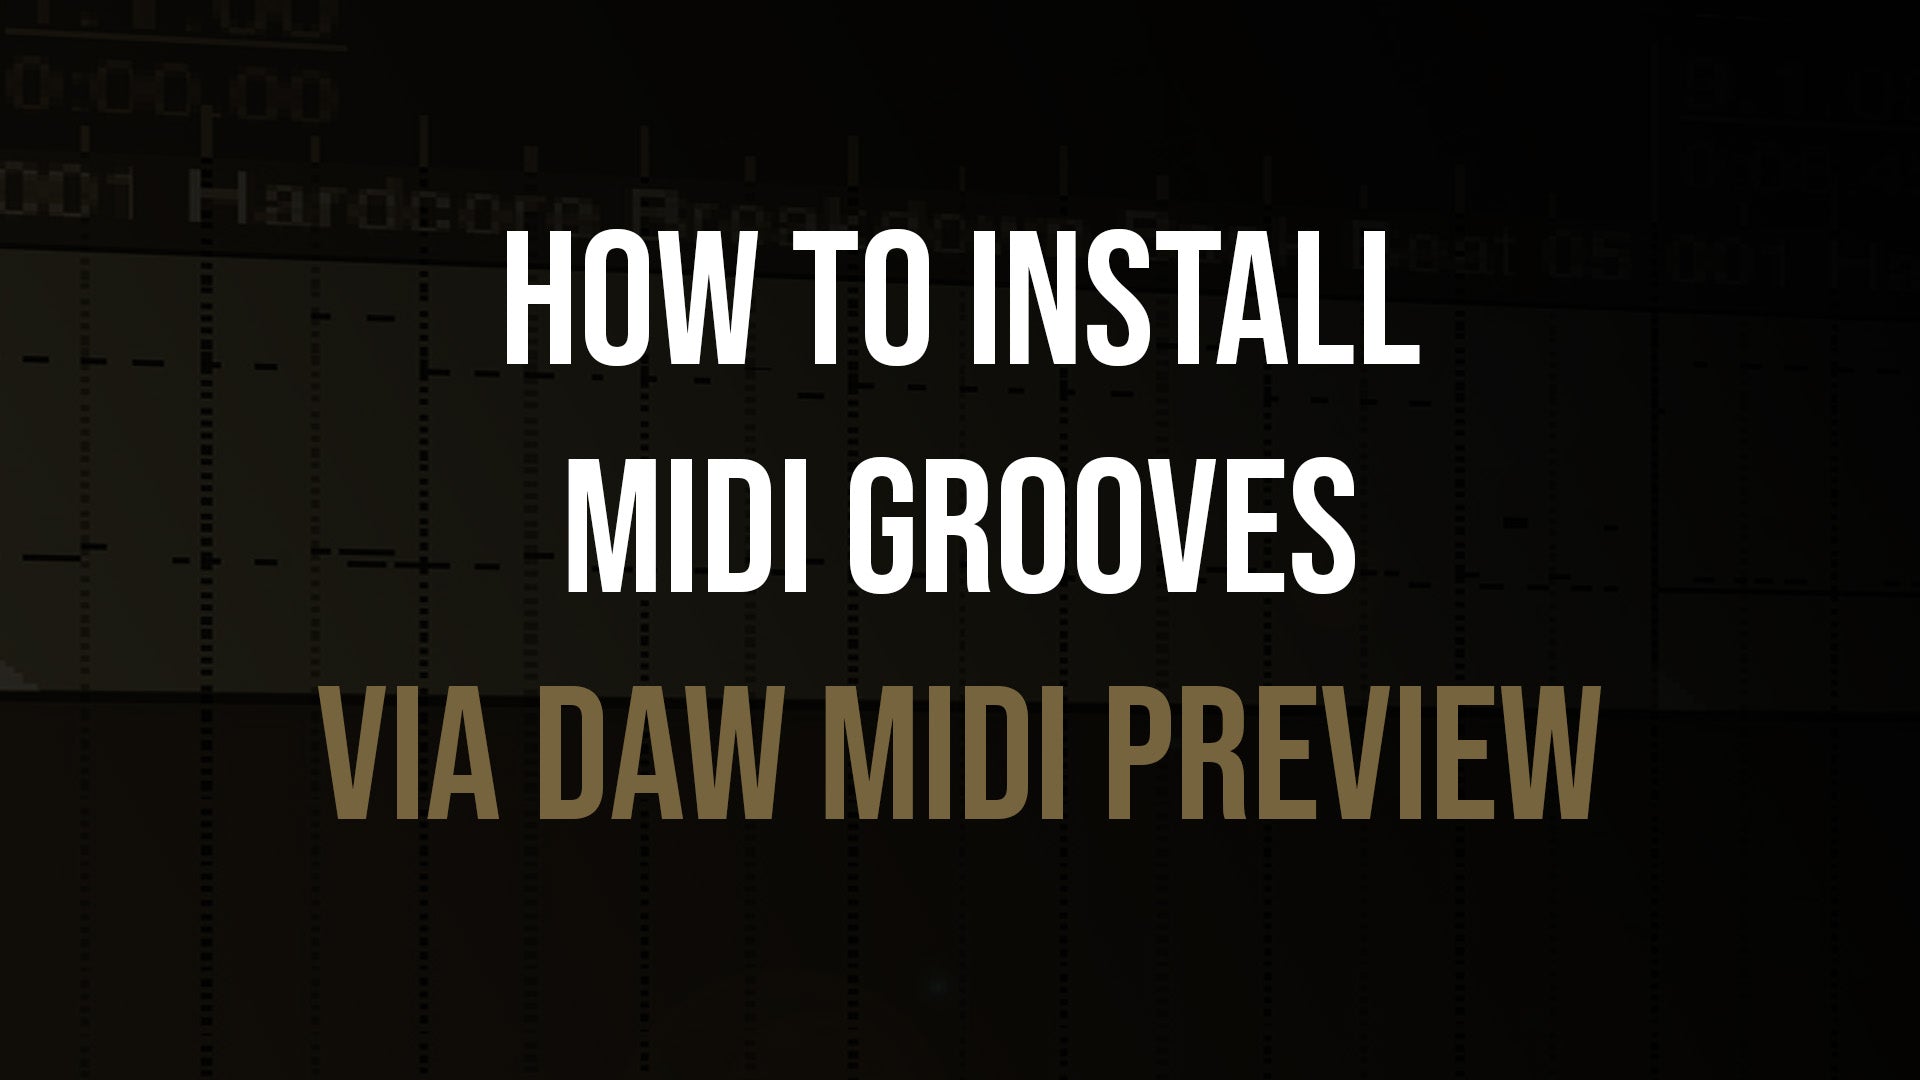 How to Preview Loudstakk MIDI Grooves in DAW